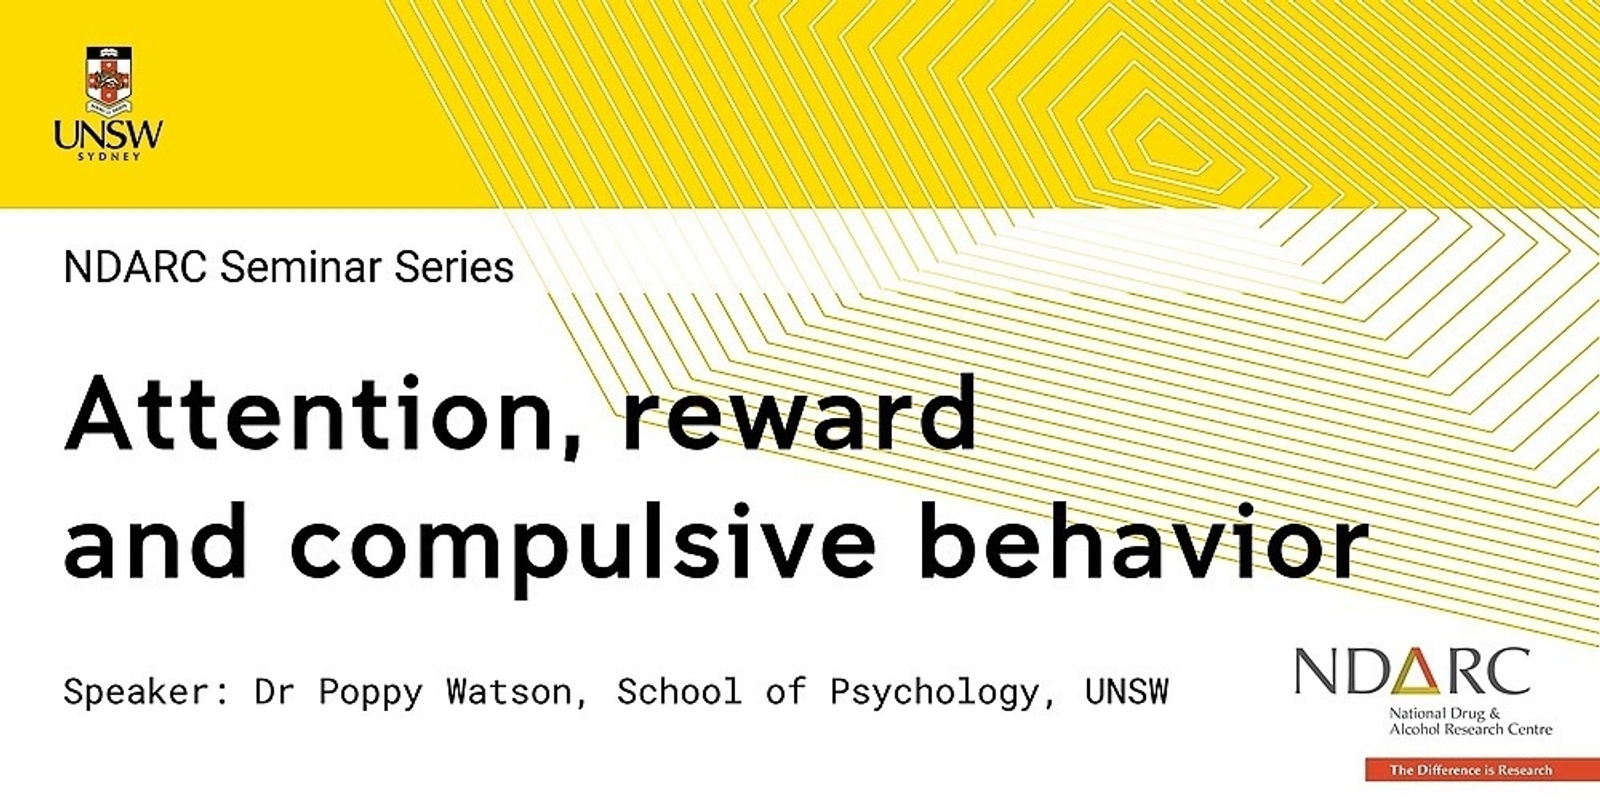 Banner image for Attention, reward and compulsive behaviour